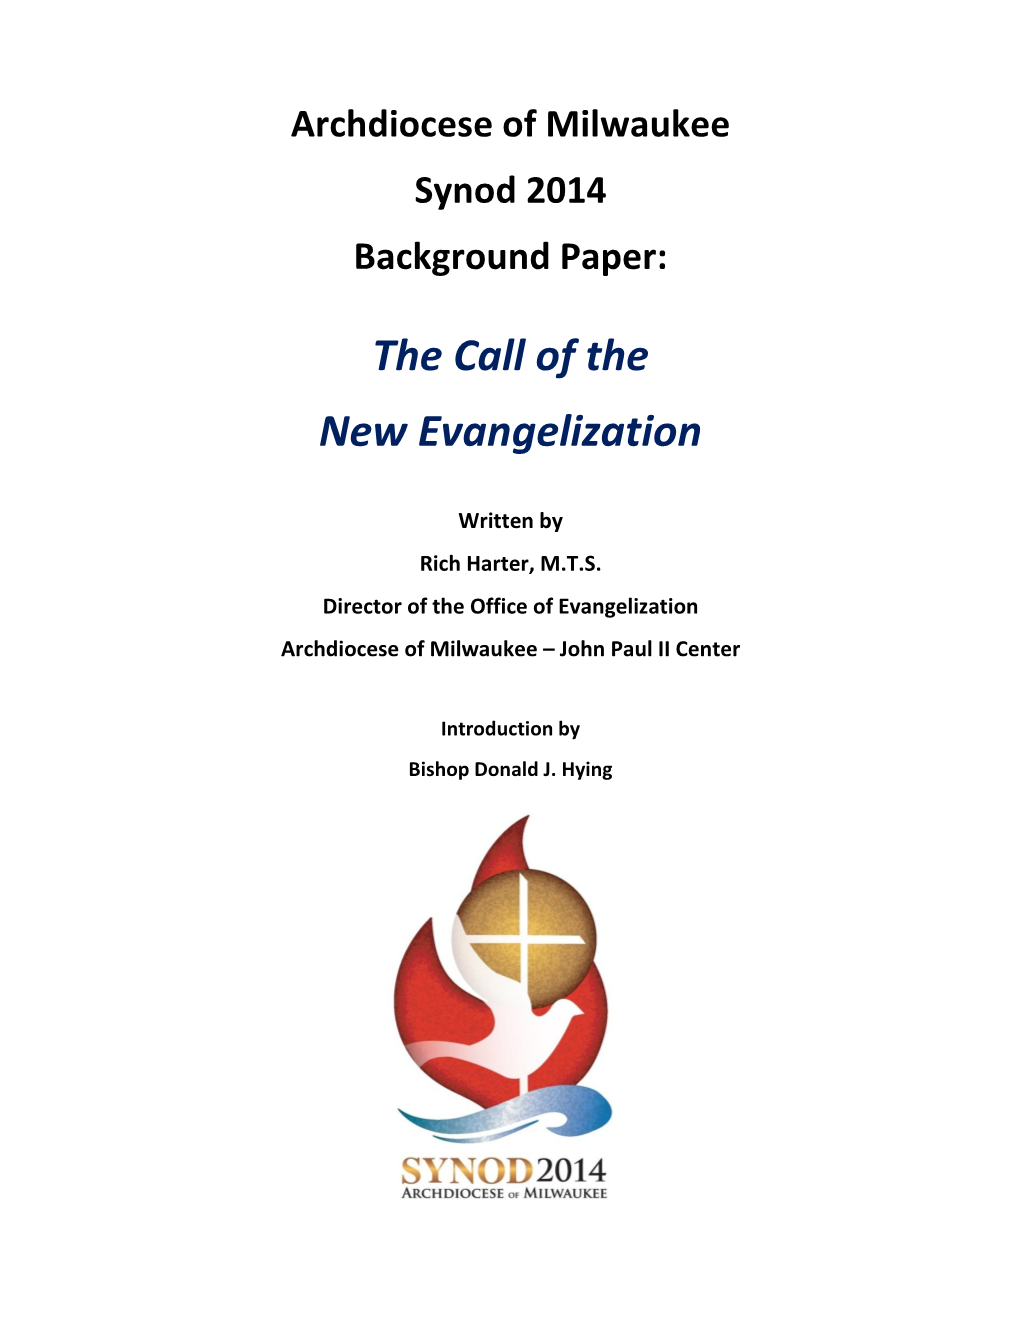 The Call of the New Evangelization